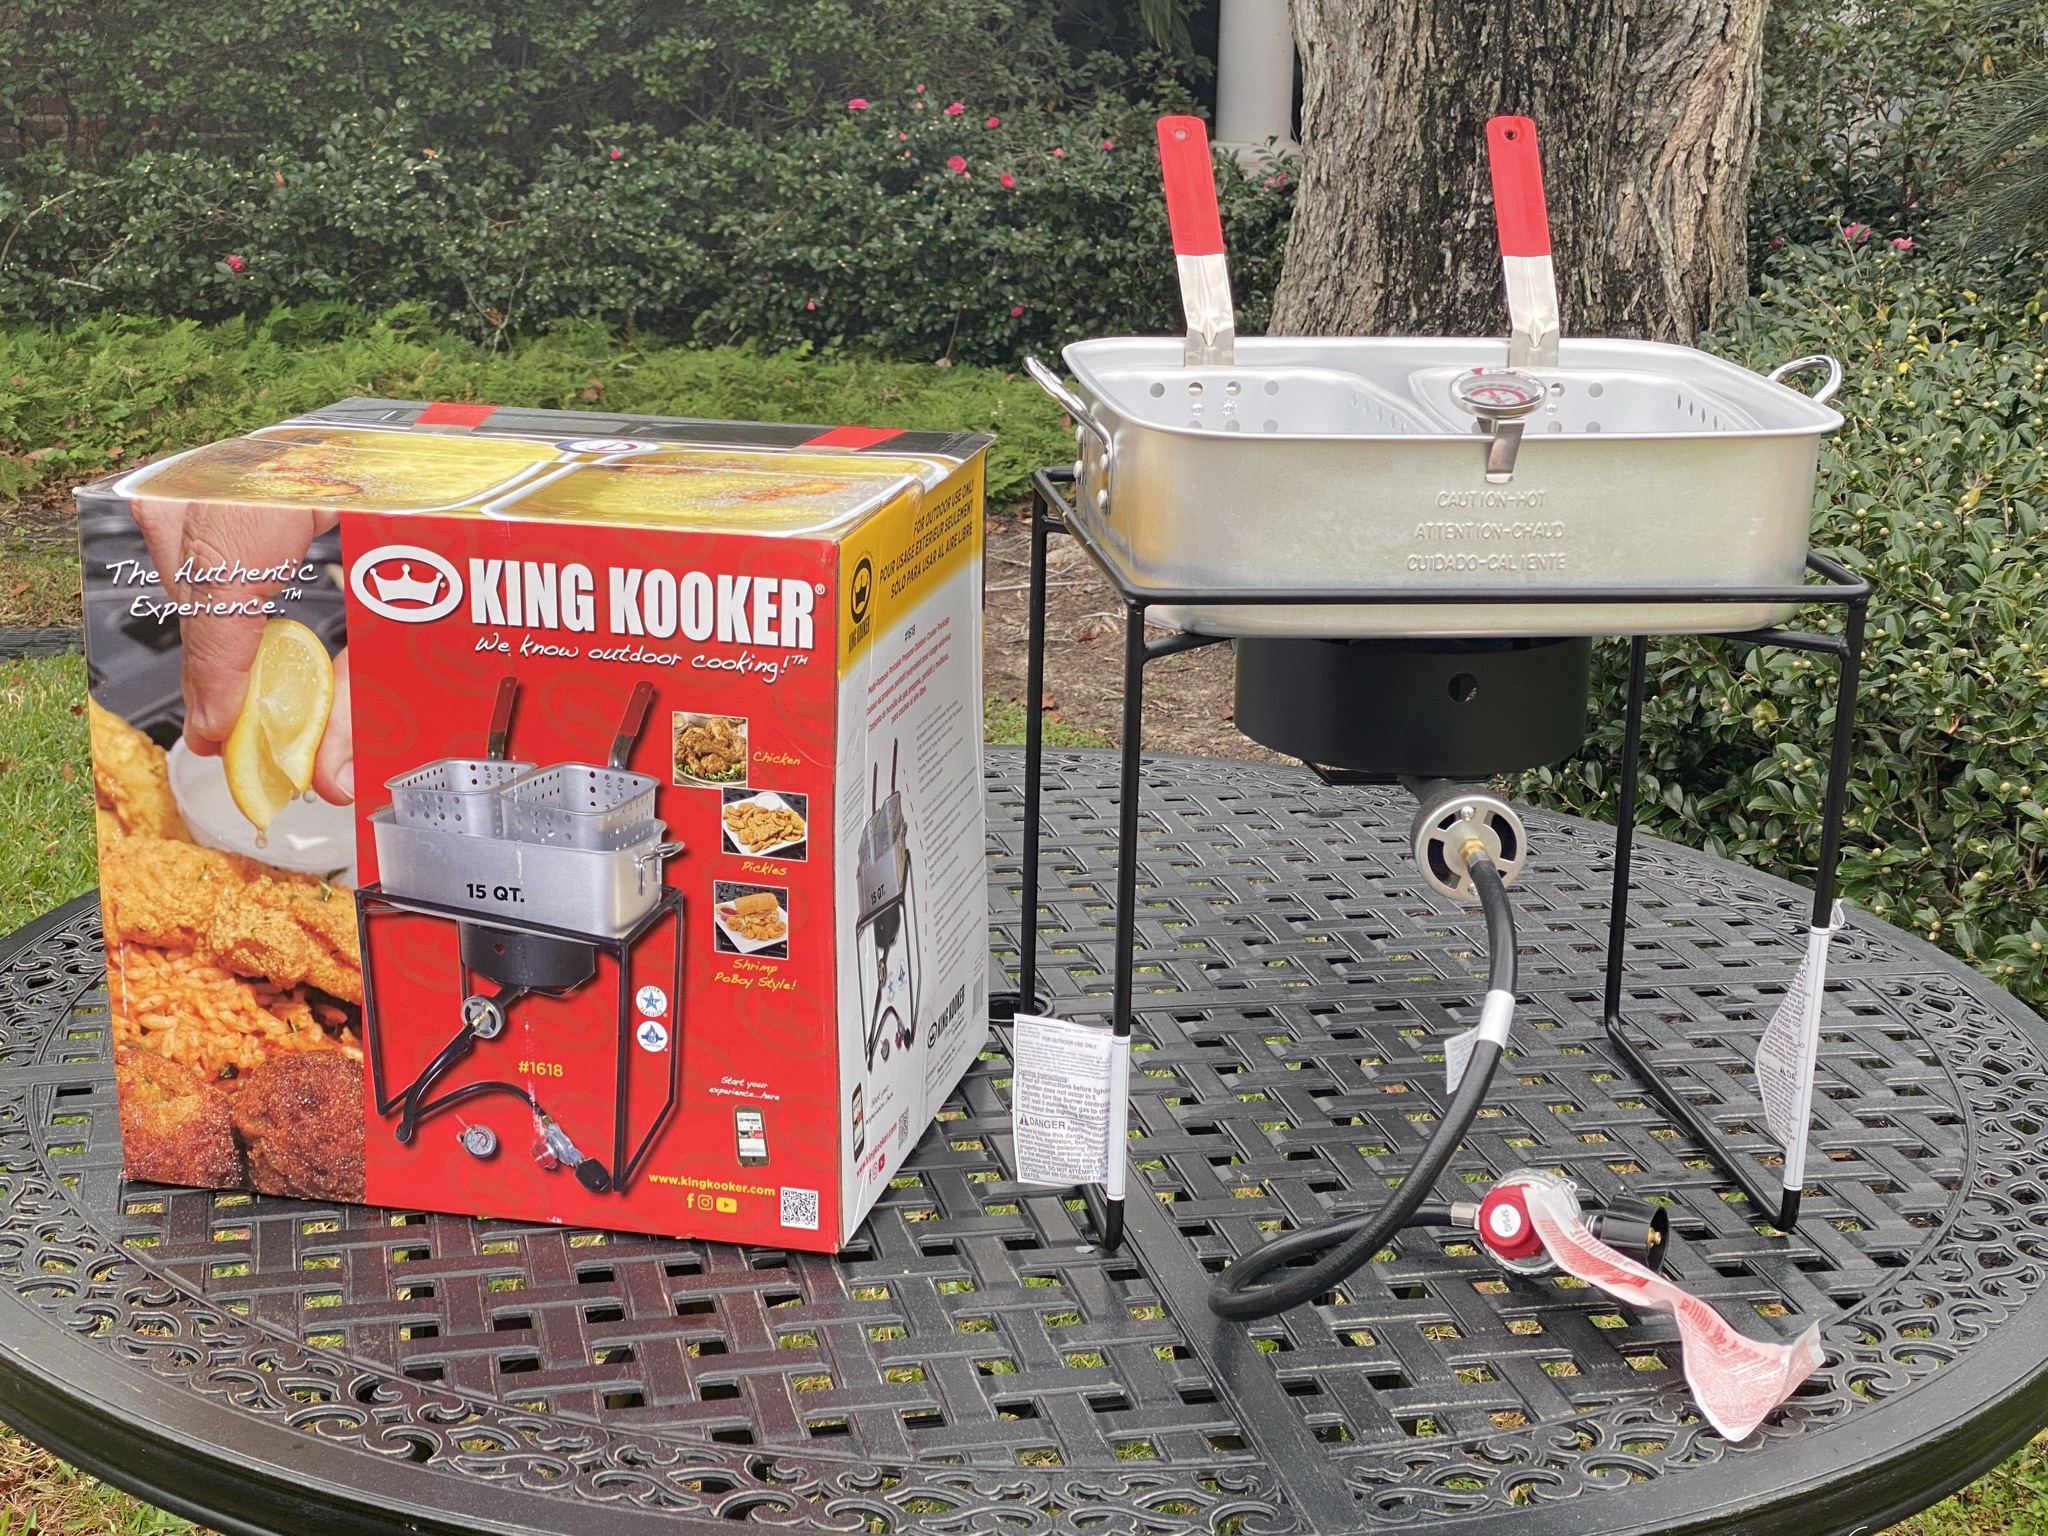 King Kooker Portable 16″ Propane Stove Burner Deep Fryer for Outdoor Cooking with 2 Frying Baskets - image 4 of 9